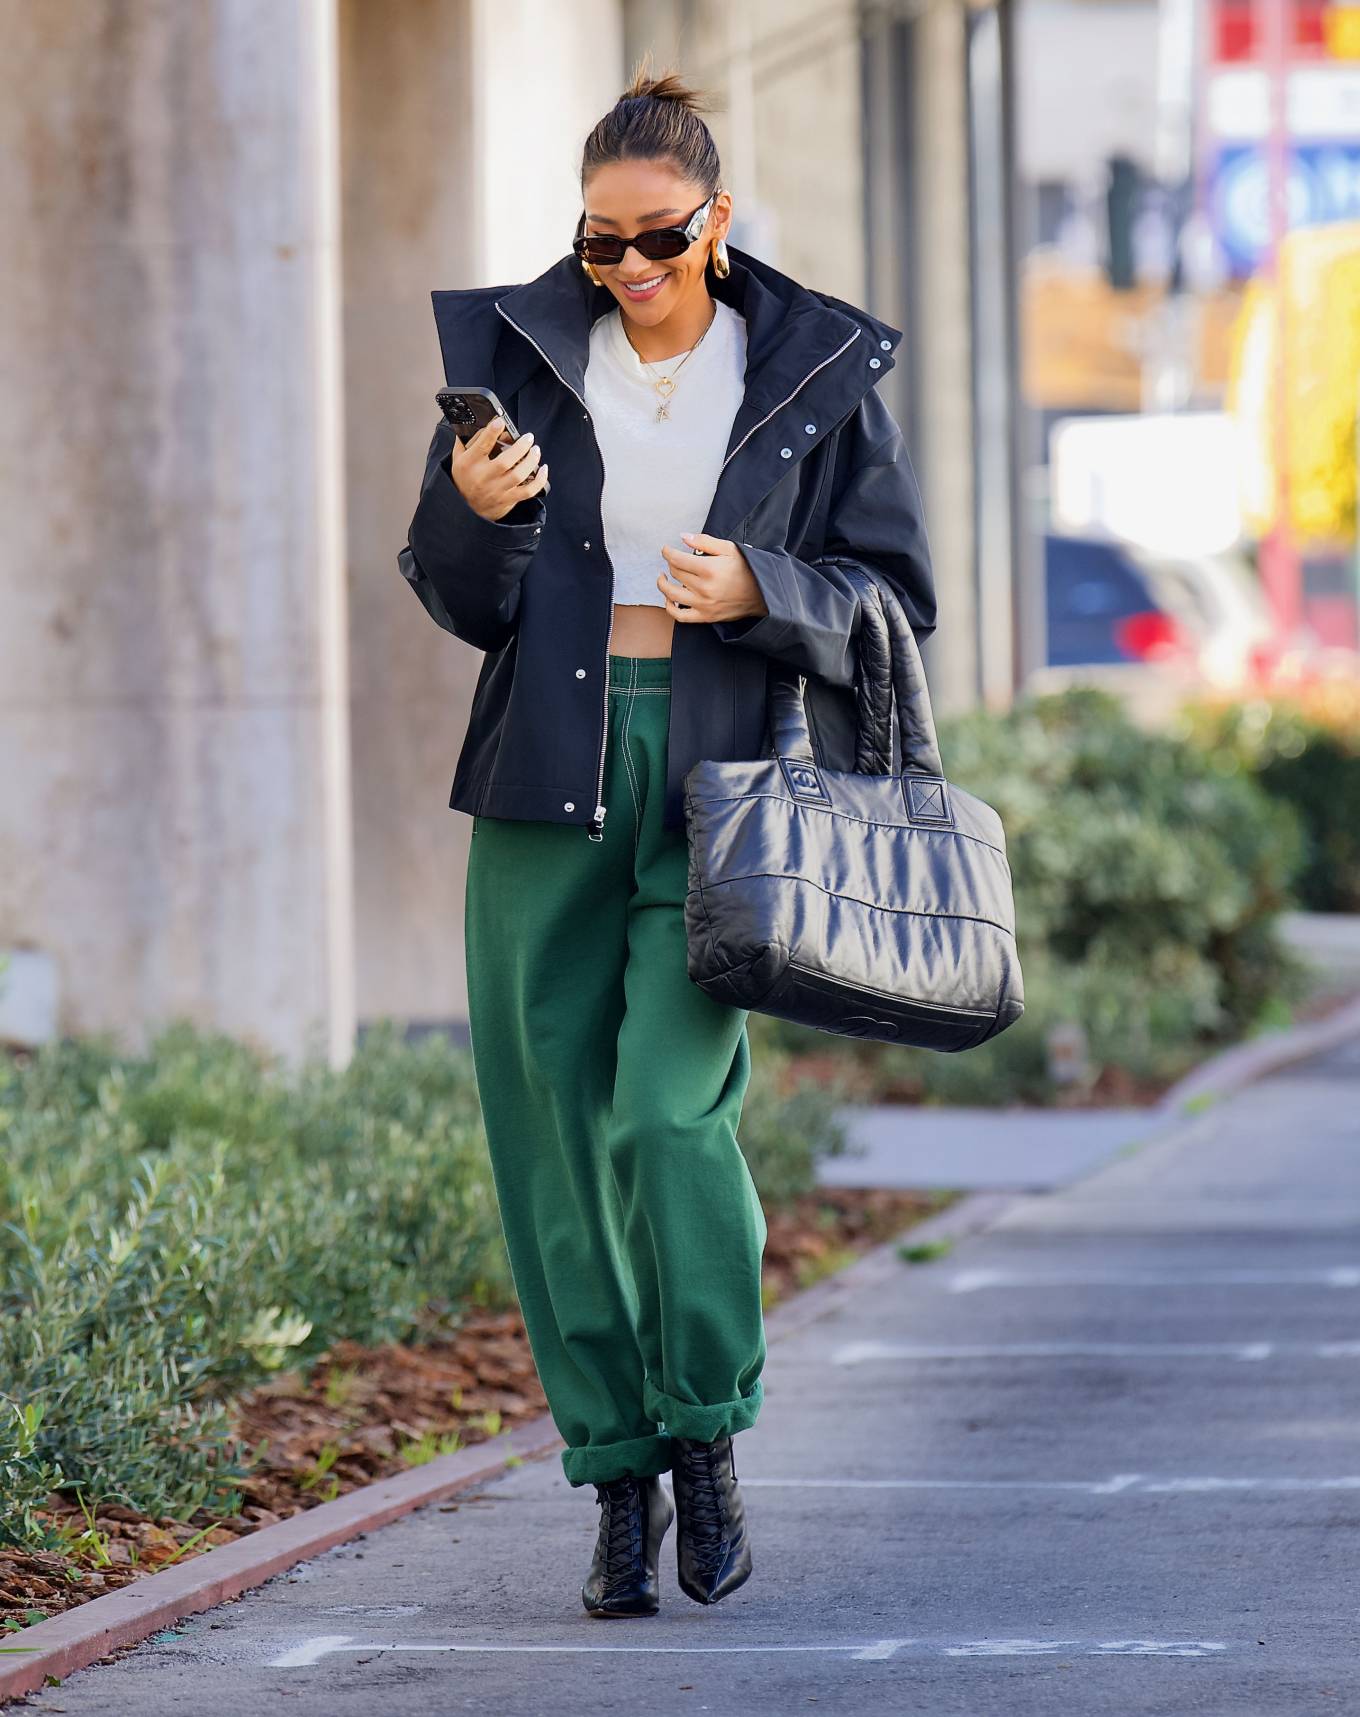 Shay Mitchell 2022 : Shay Mitchell – Wearing Sarah Jessica Parker style rolled up sweatpants with heeled boots in LA-03